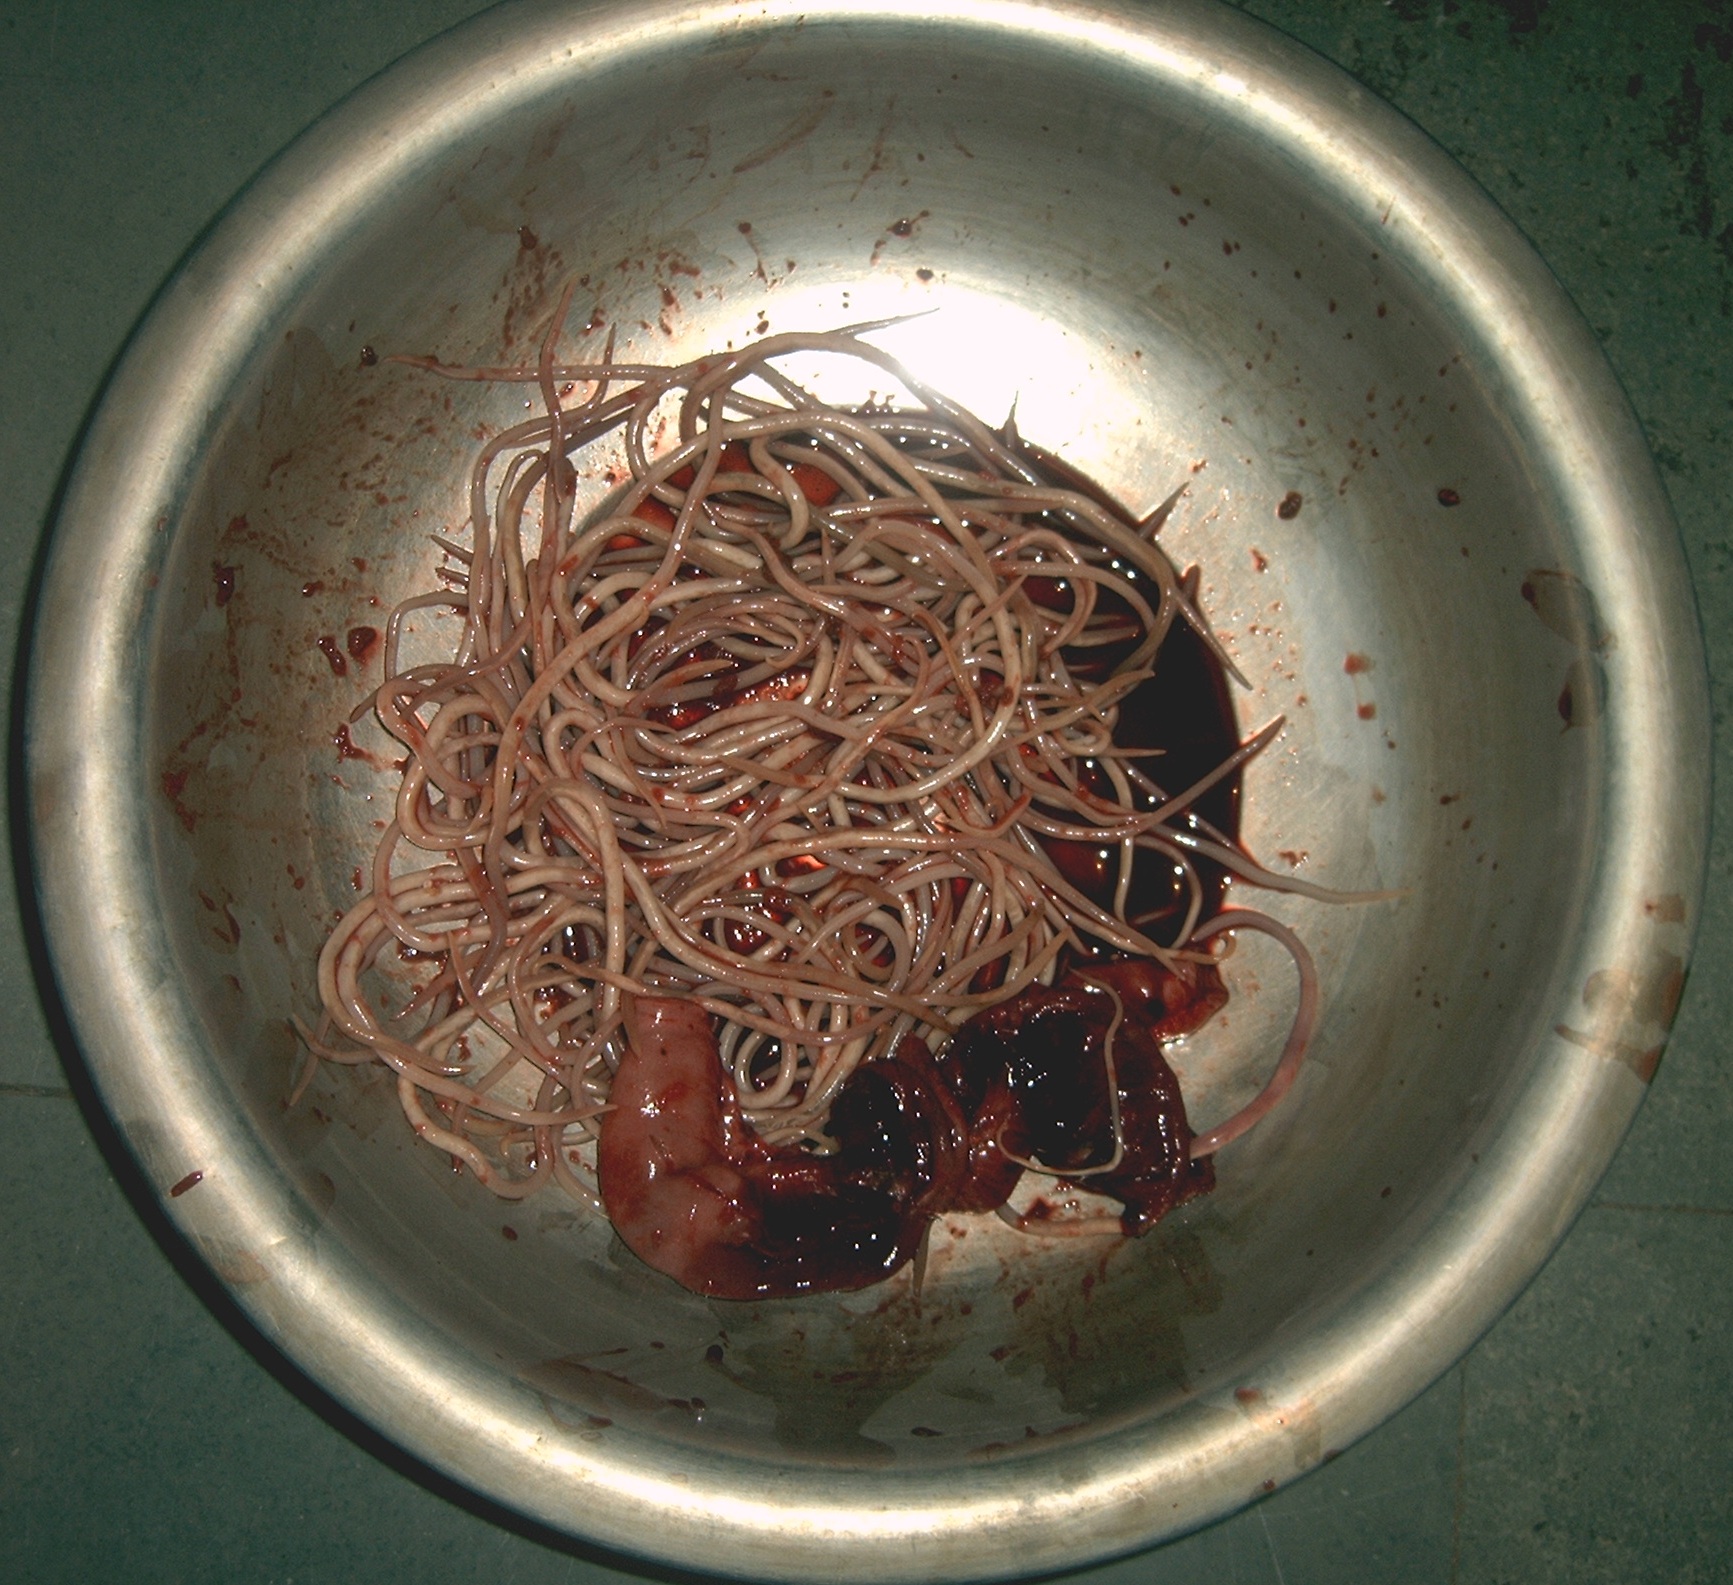 Ascaris lumbricoides caused gangrene of ileum (shown worms removed from a child)